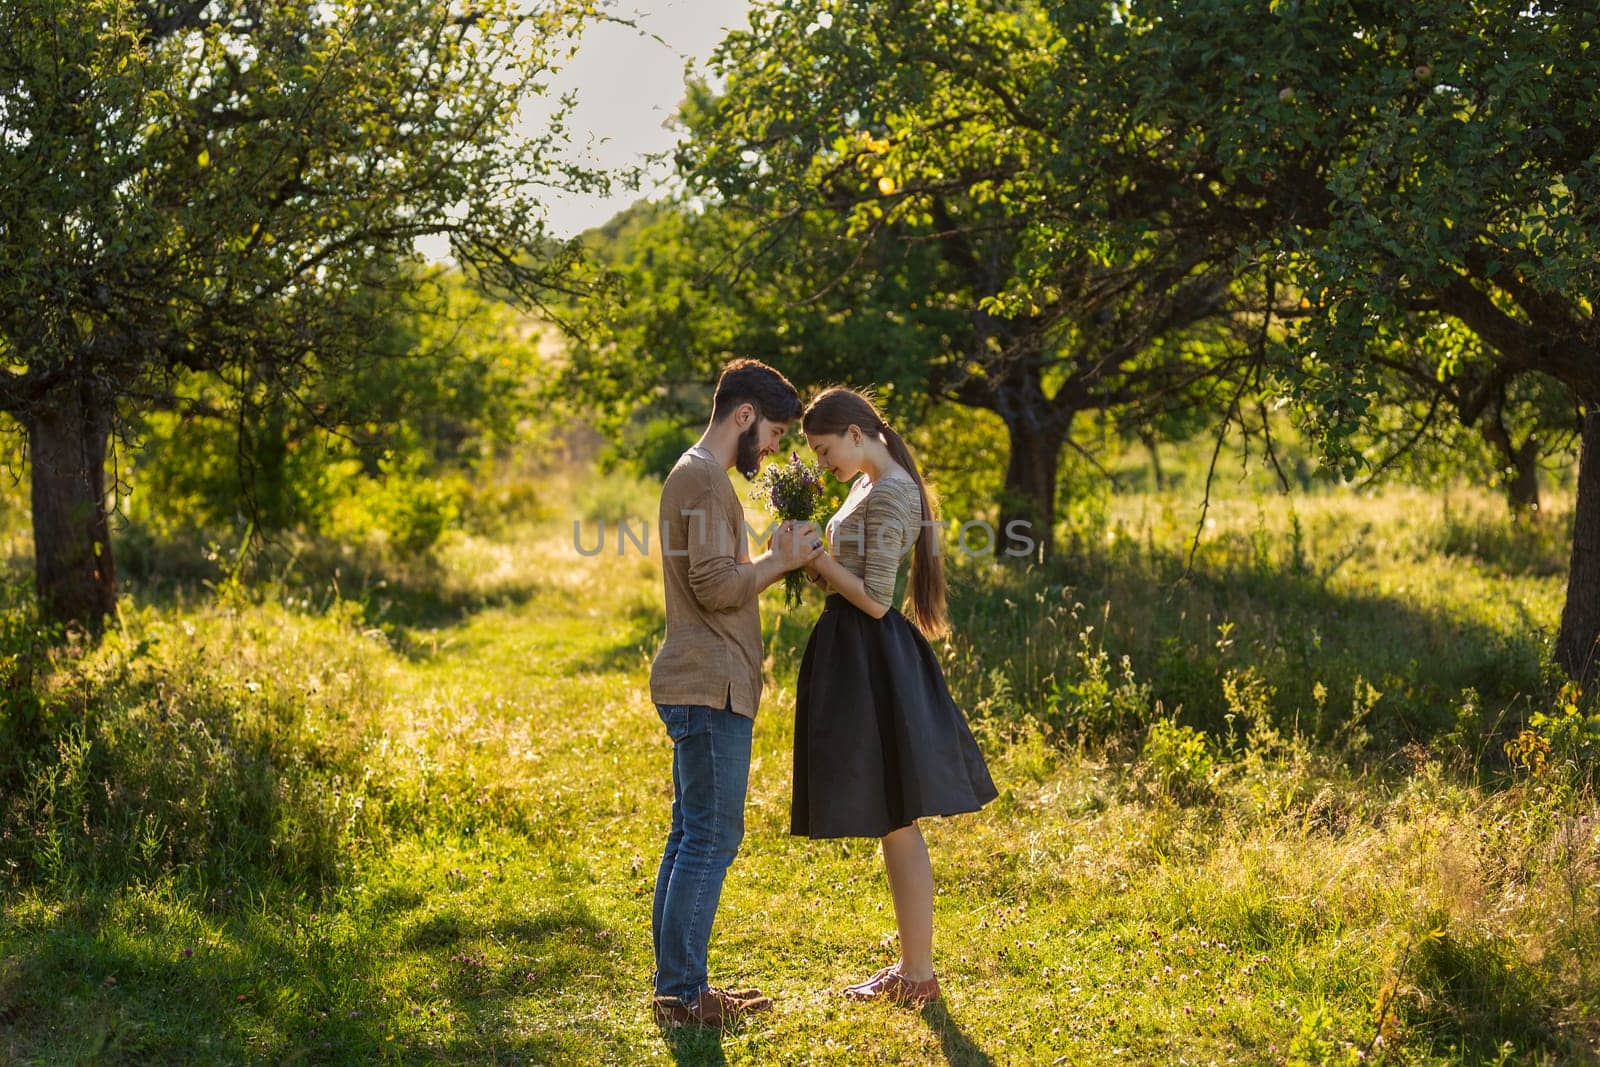 couple in nature with wildflowers, smelling a bouquet